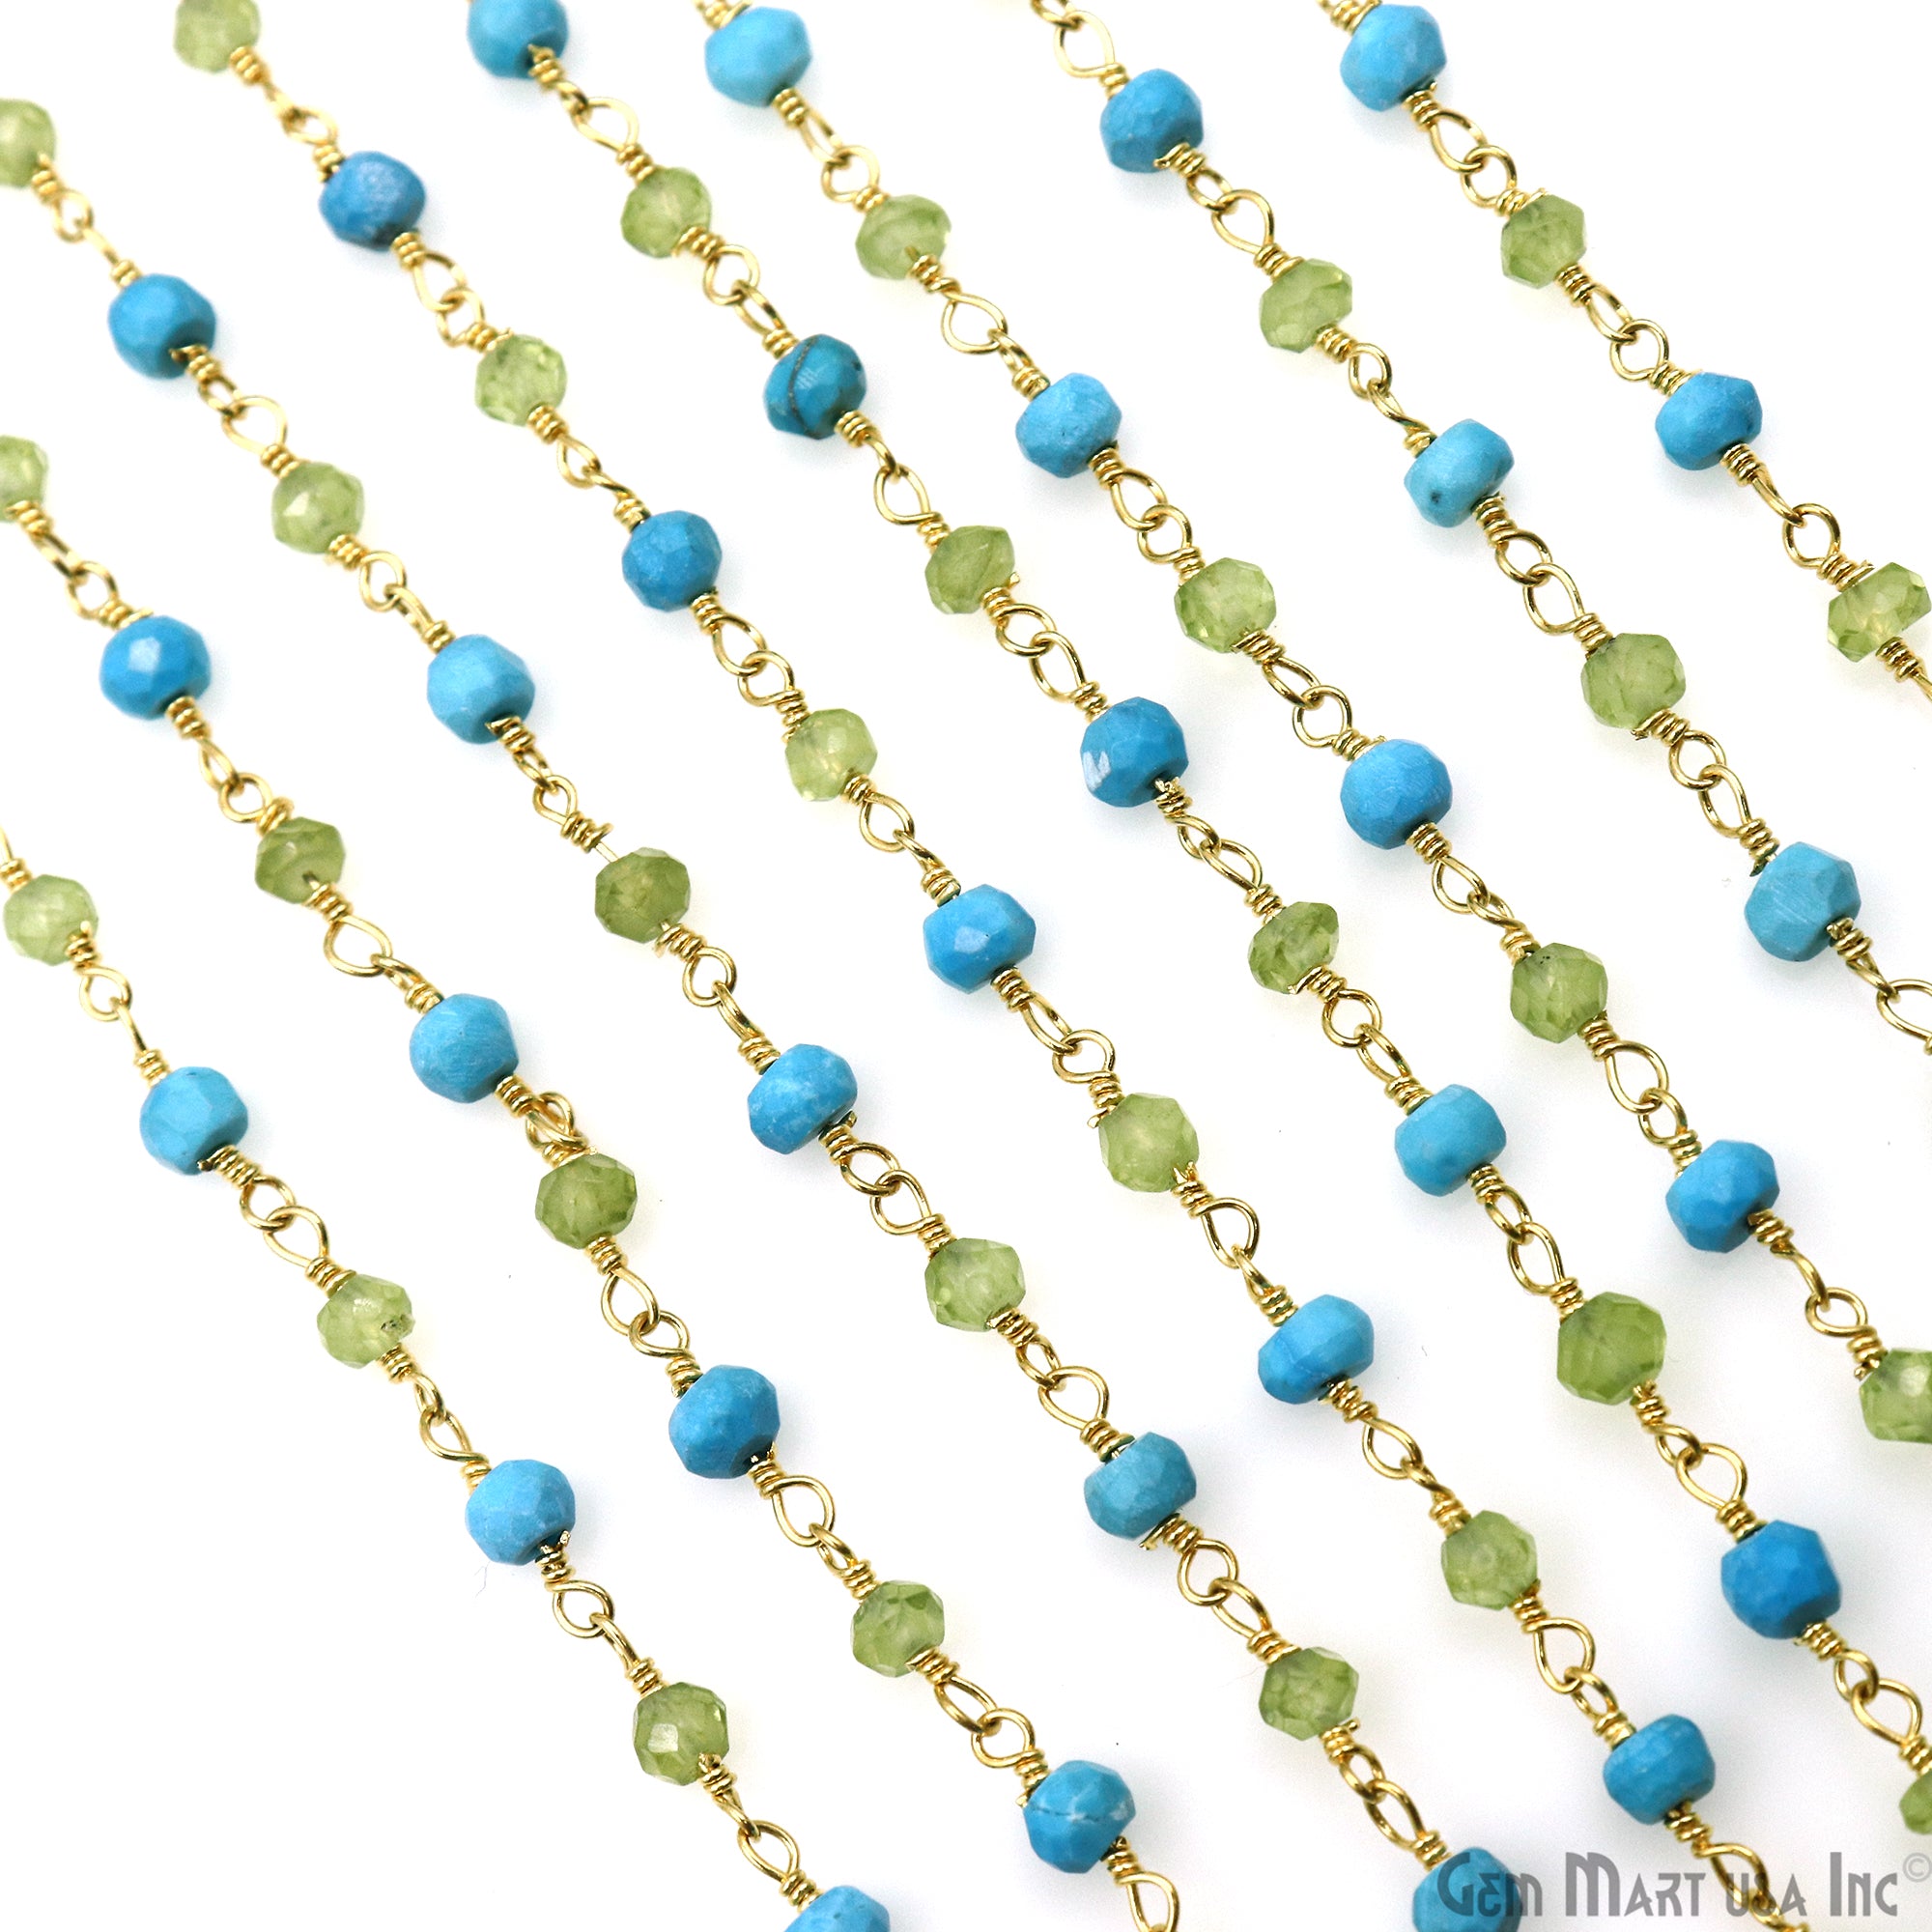 Turquoise & Peridot Bracelet 3-3.5mm Gold Plated Wire Beads Rosary Chain